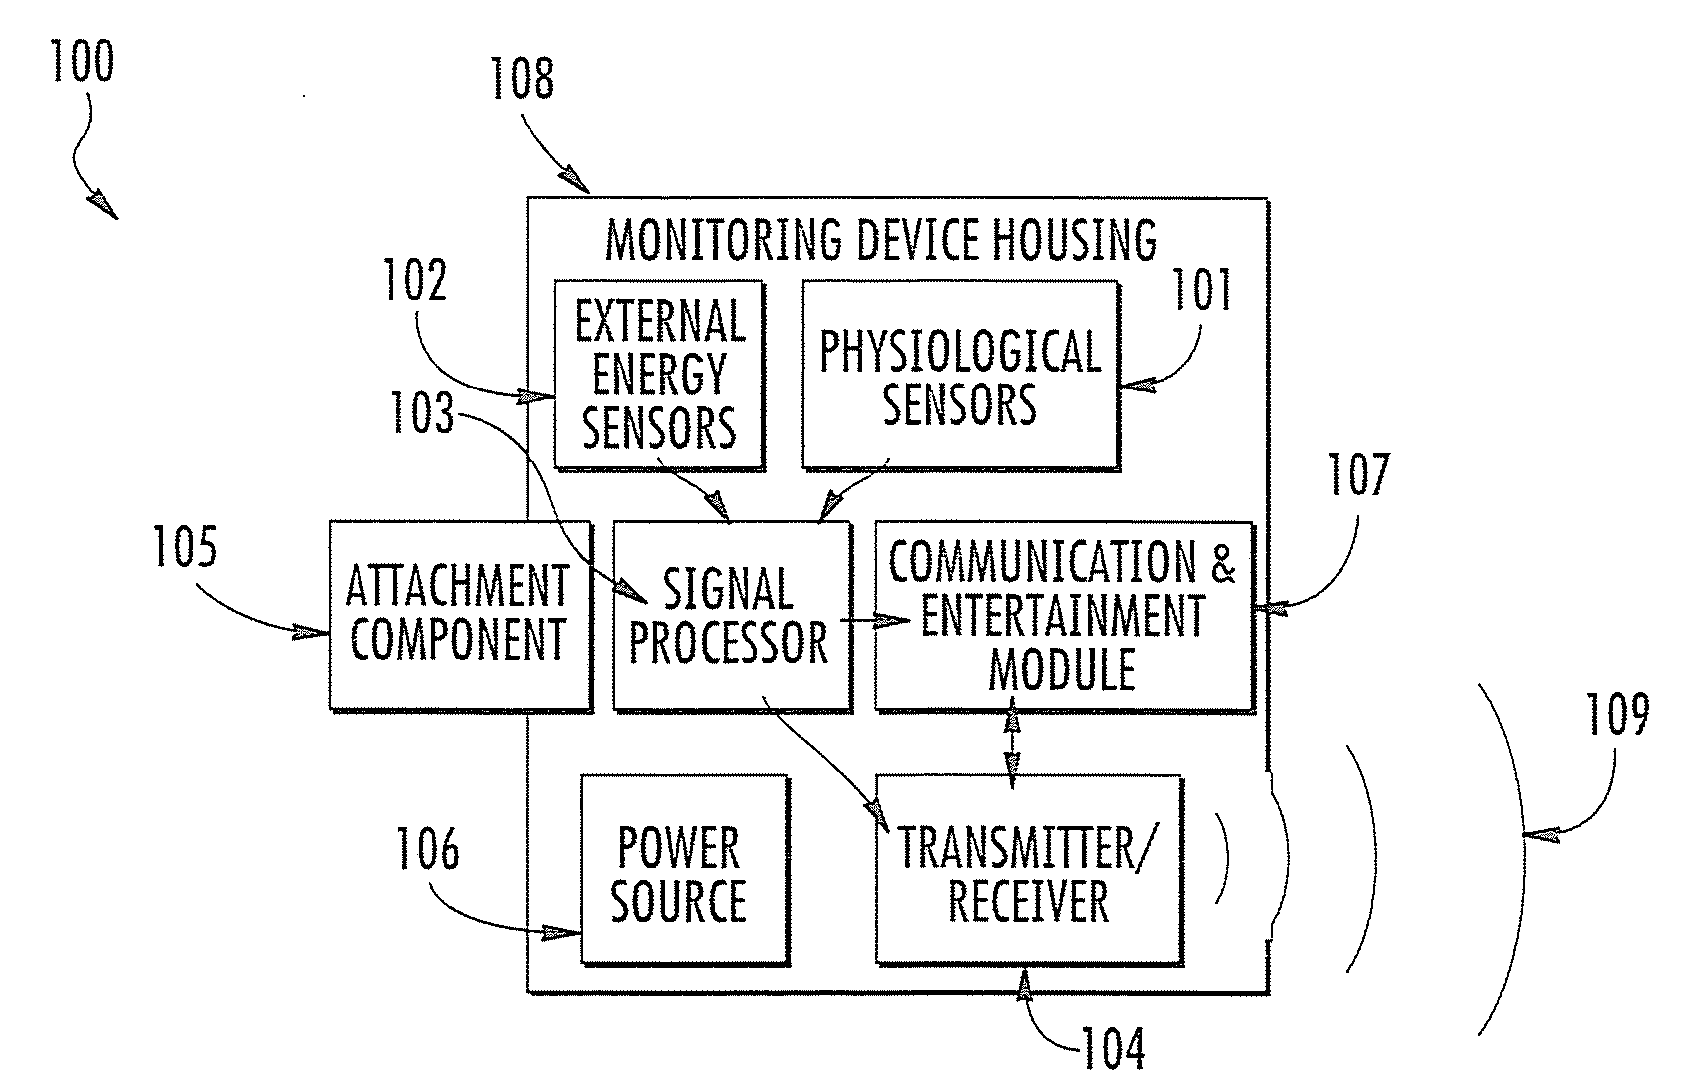 Form-Fitted Monitoring Apparatus for Health and Environmental Monitoring